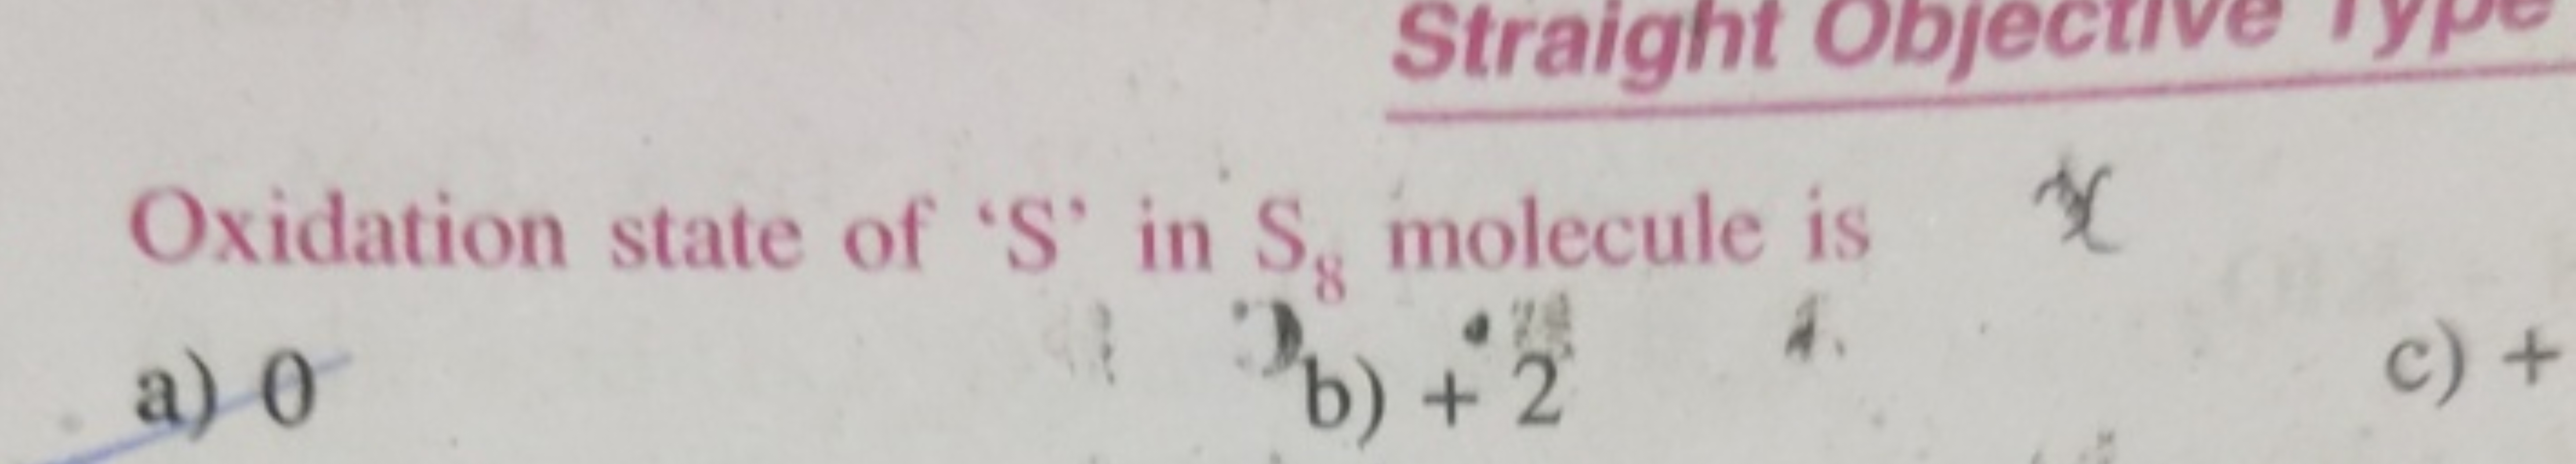 Oxidation state of ' S ' in S8​ molecule is (X
a) 0
b) +2
c) +
